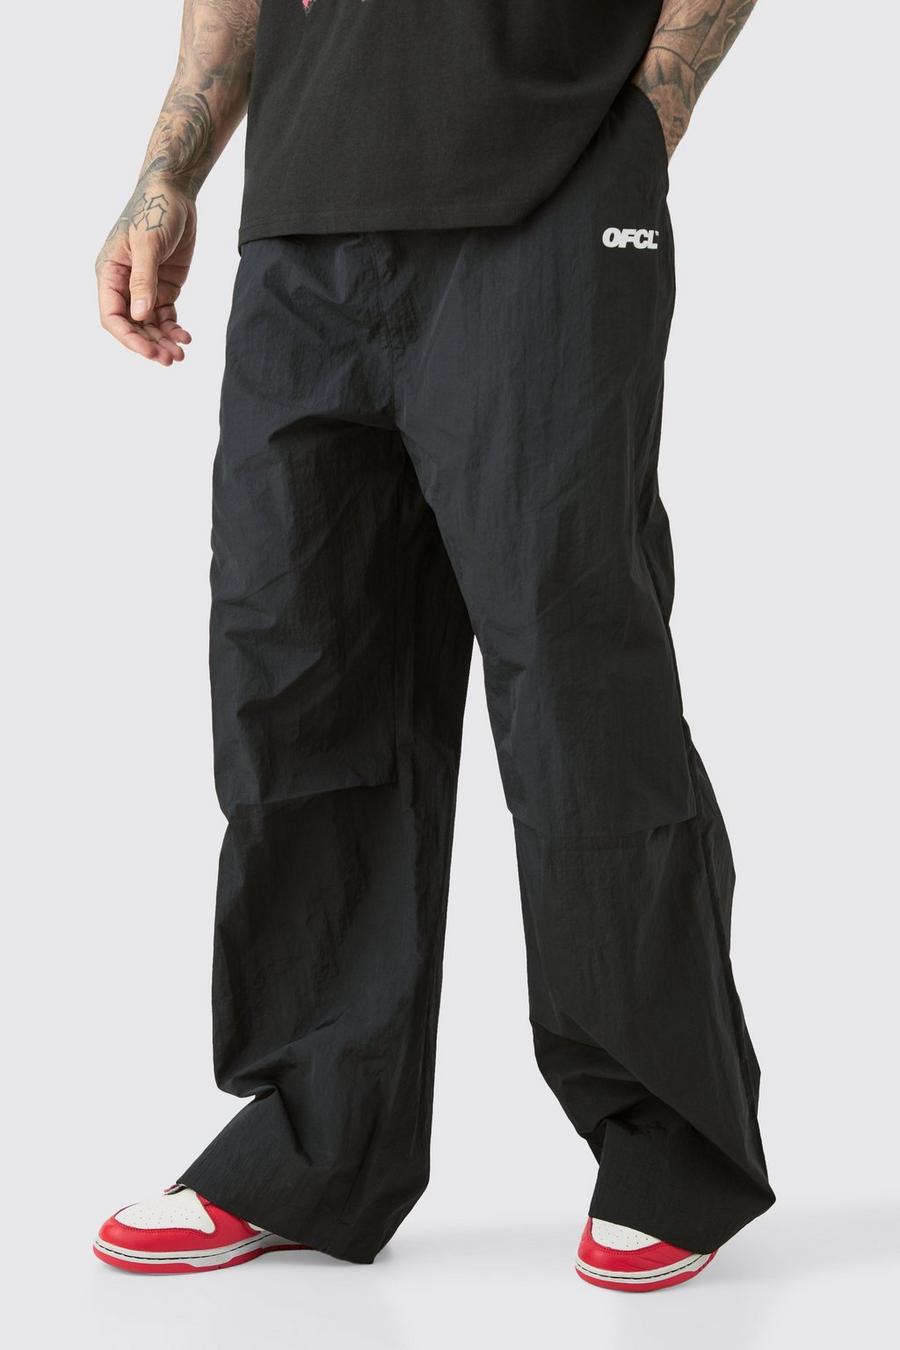 Black Tall Oversized OFCL Parachute Pants image number 1